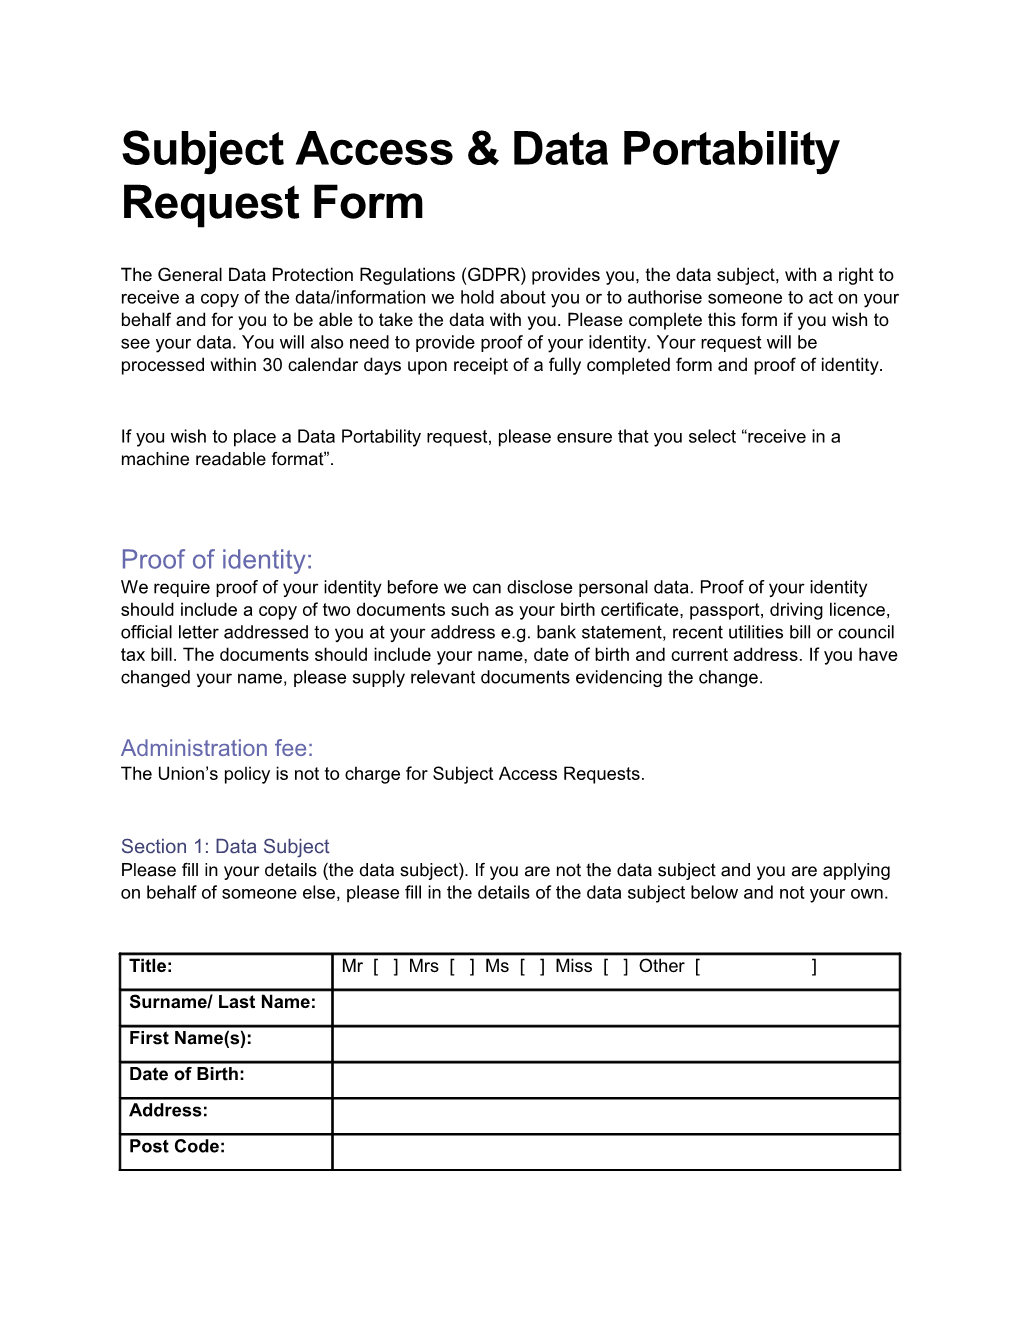 Subject Access & Data Portability Request Form